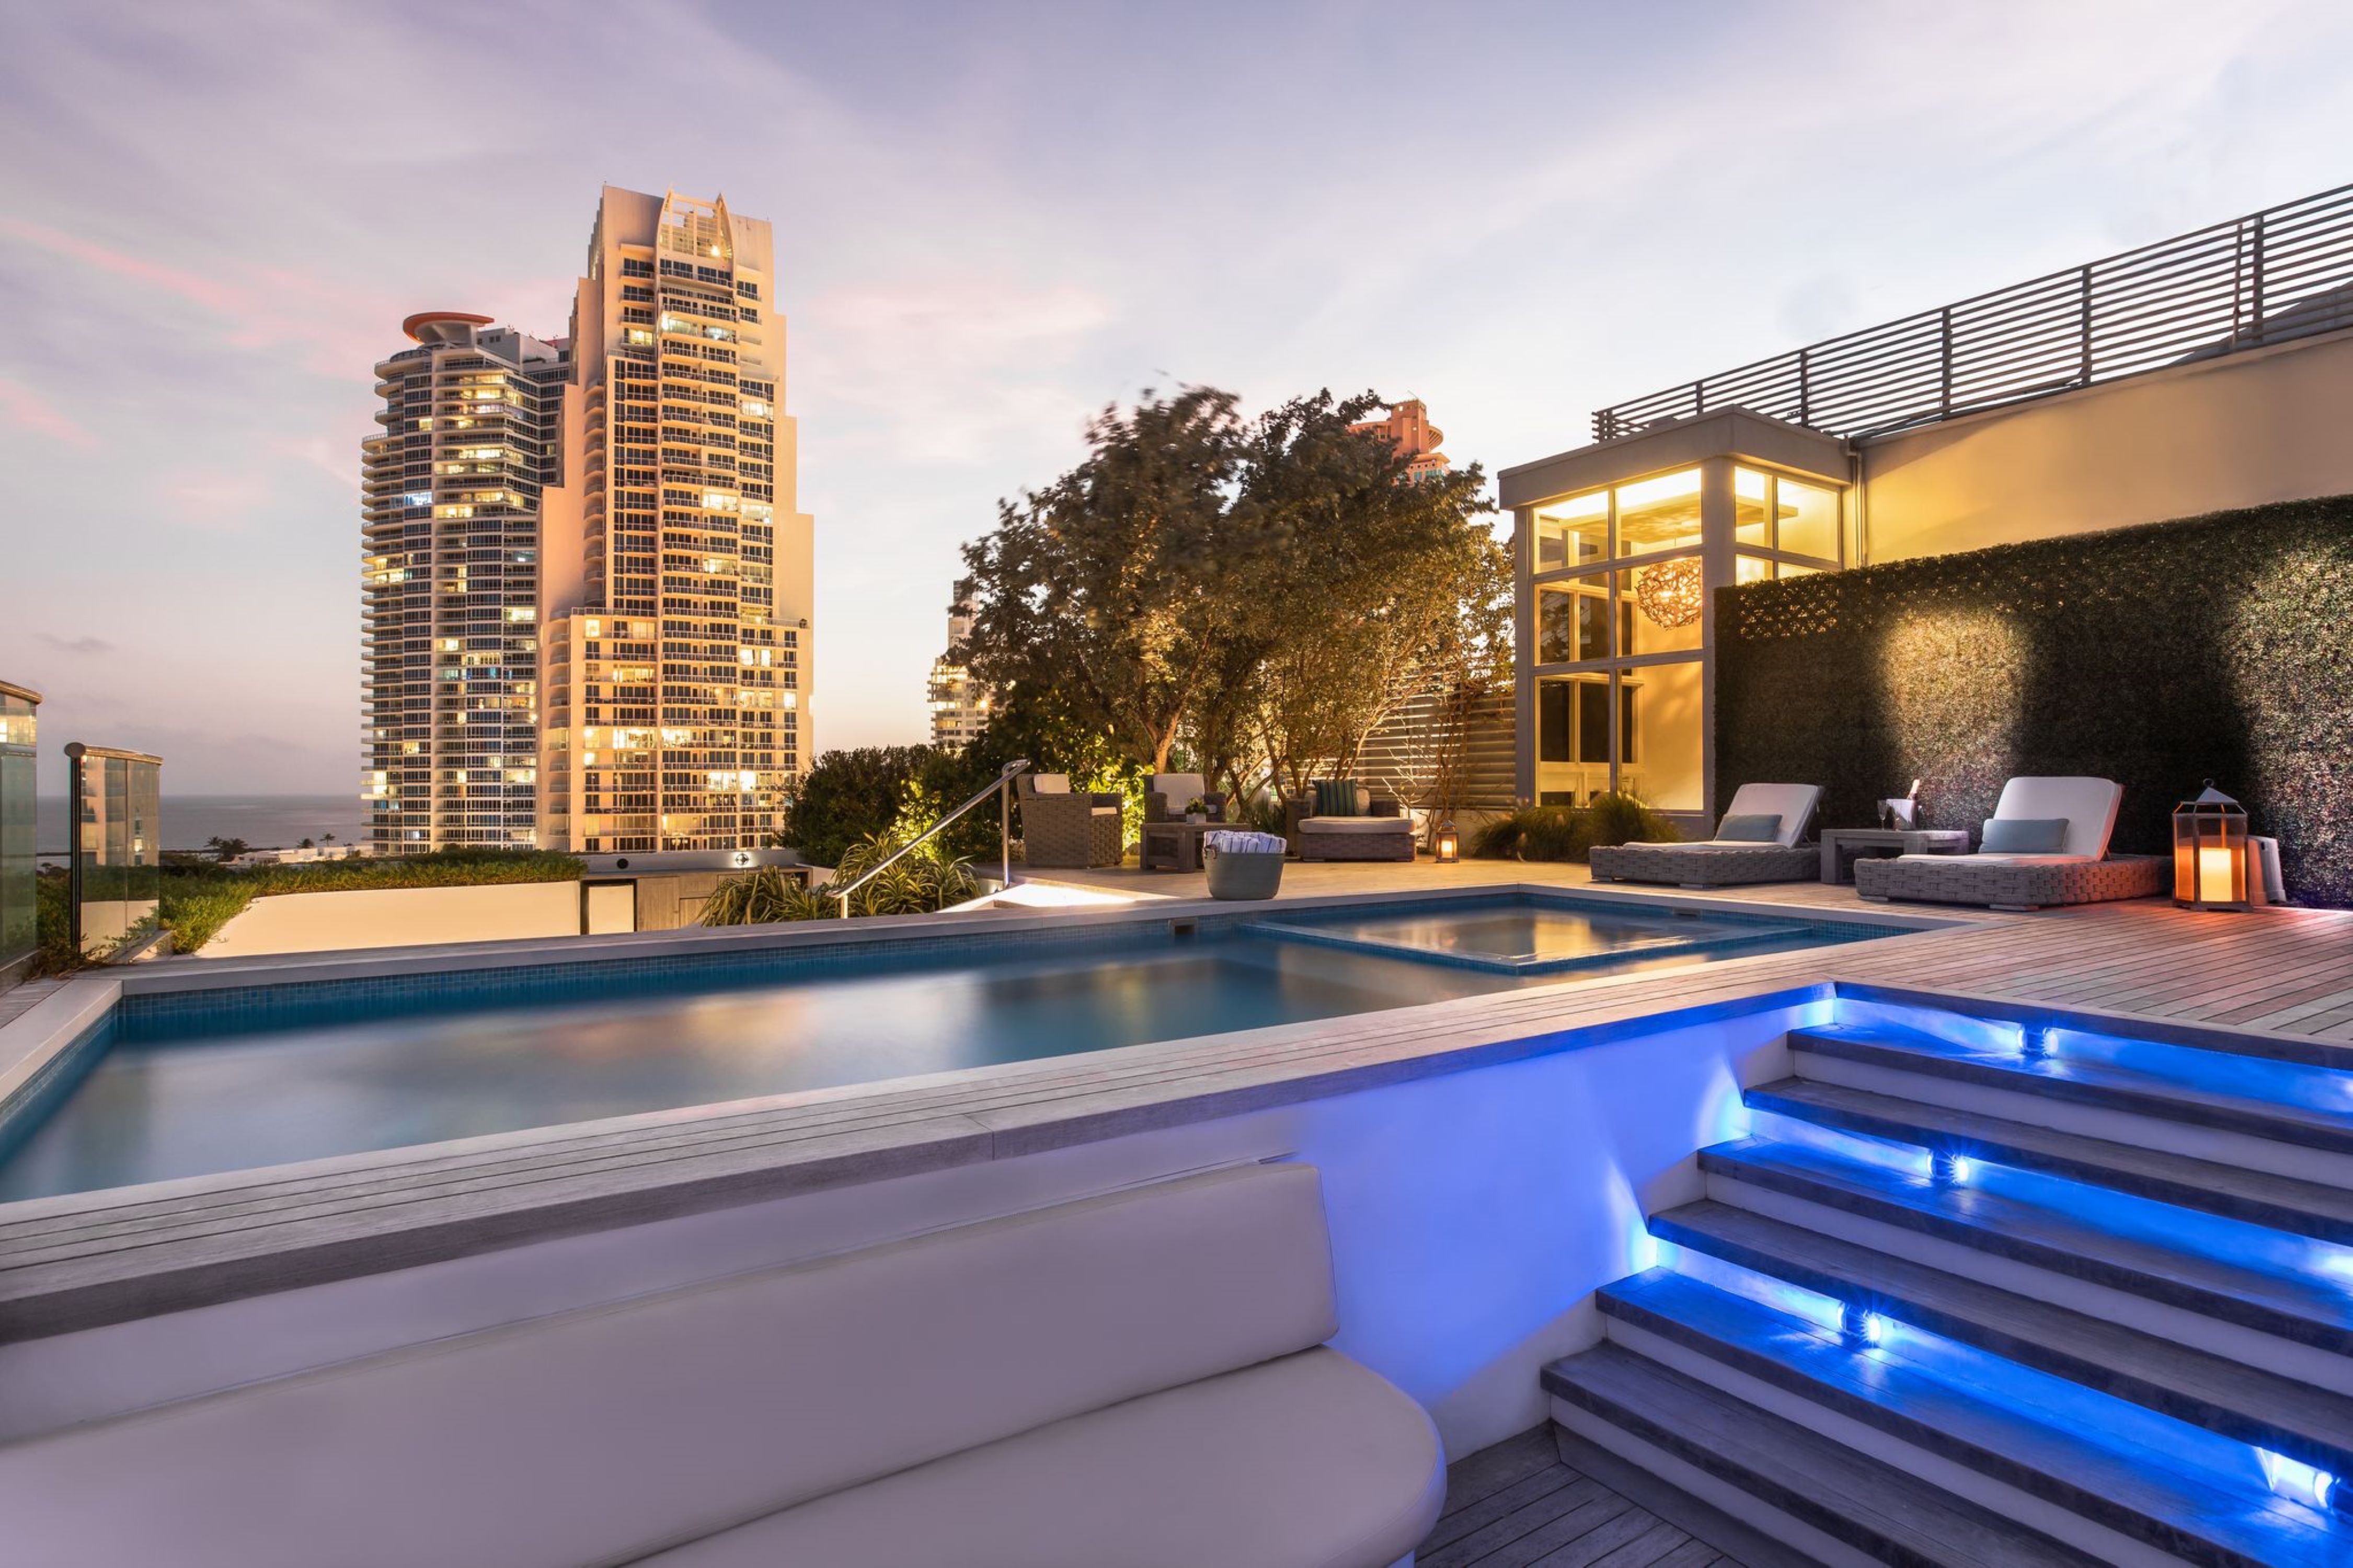 Penthouse Suite Pool at Night